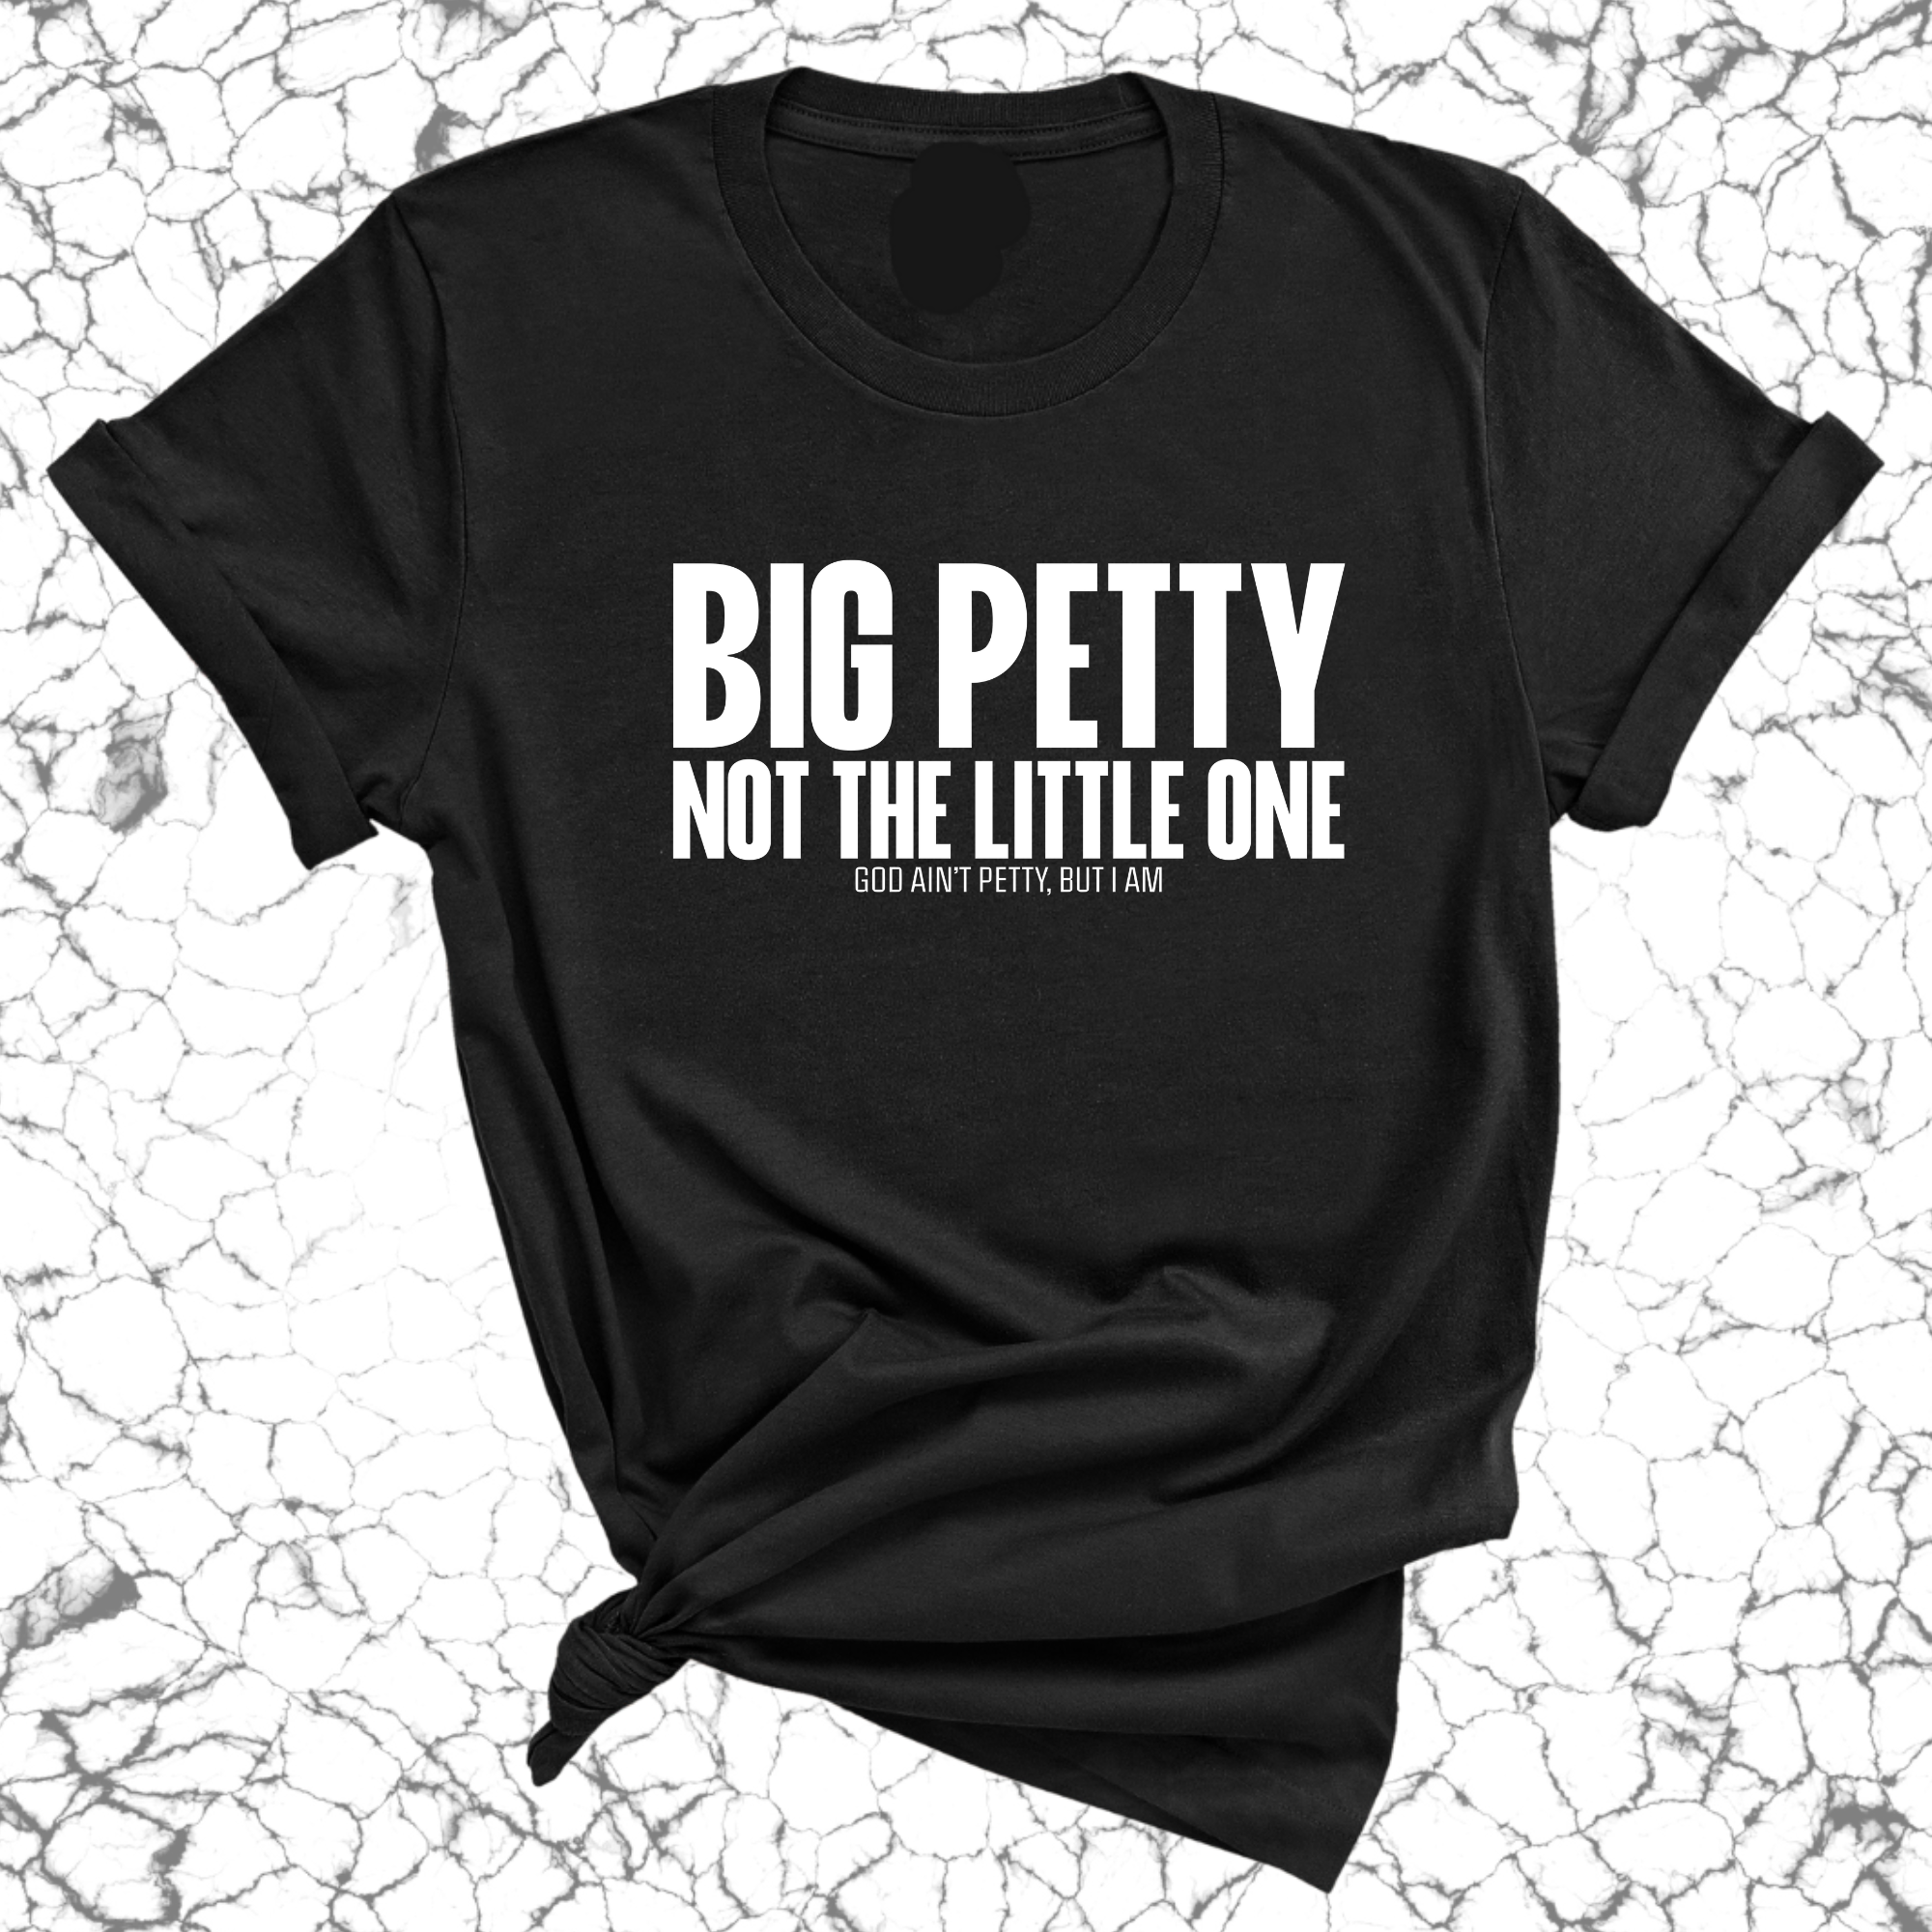 Big Petty Not the Little One Unisex Tee-T-Shirt-The Original God Ain't Petty But I Am